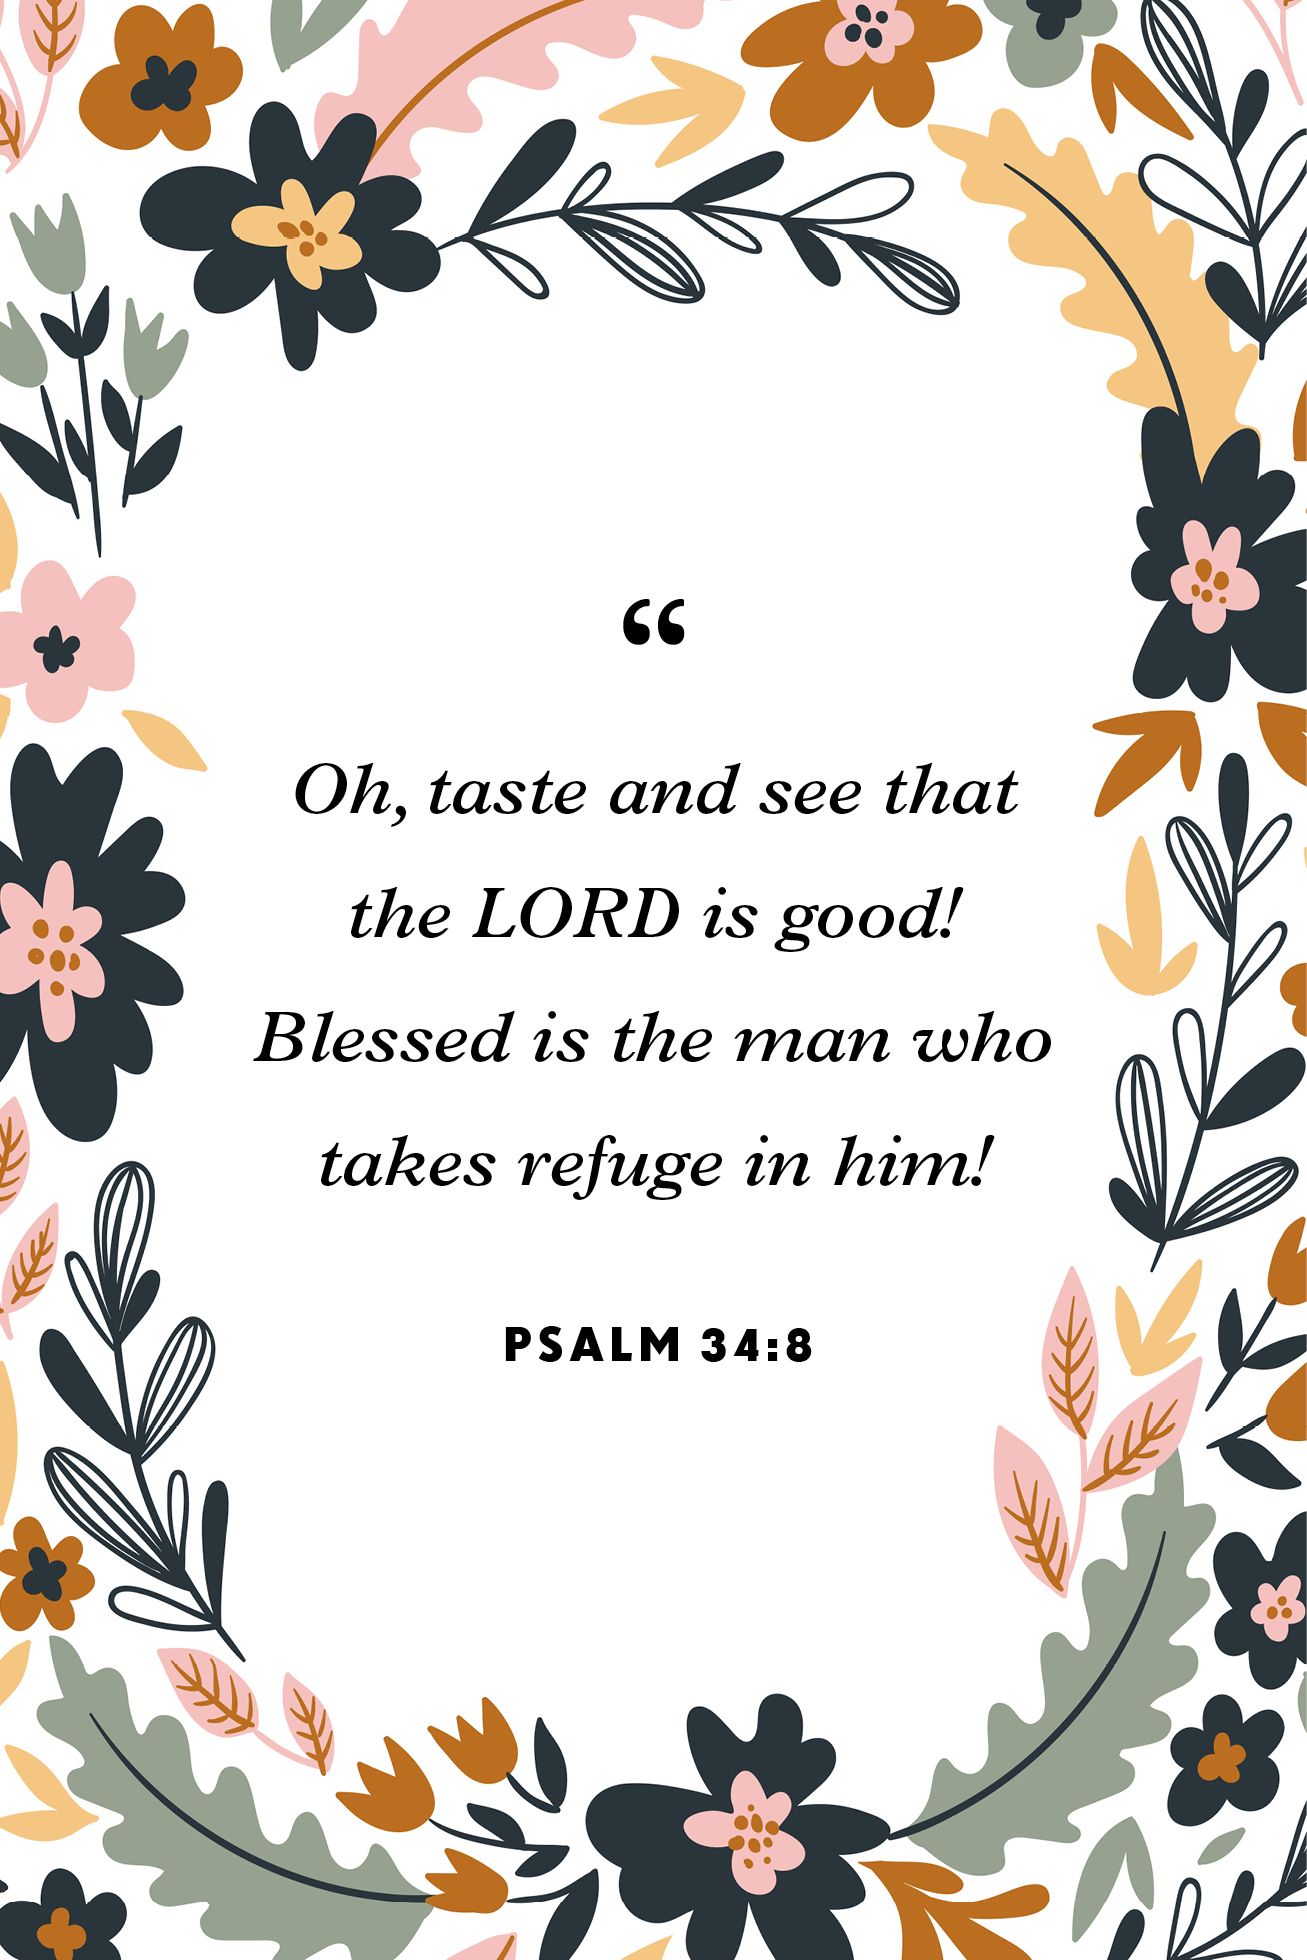 feeling blessed bible quotes